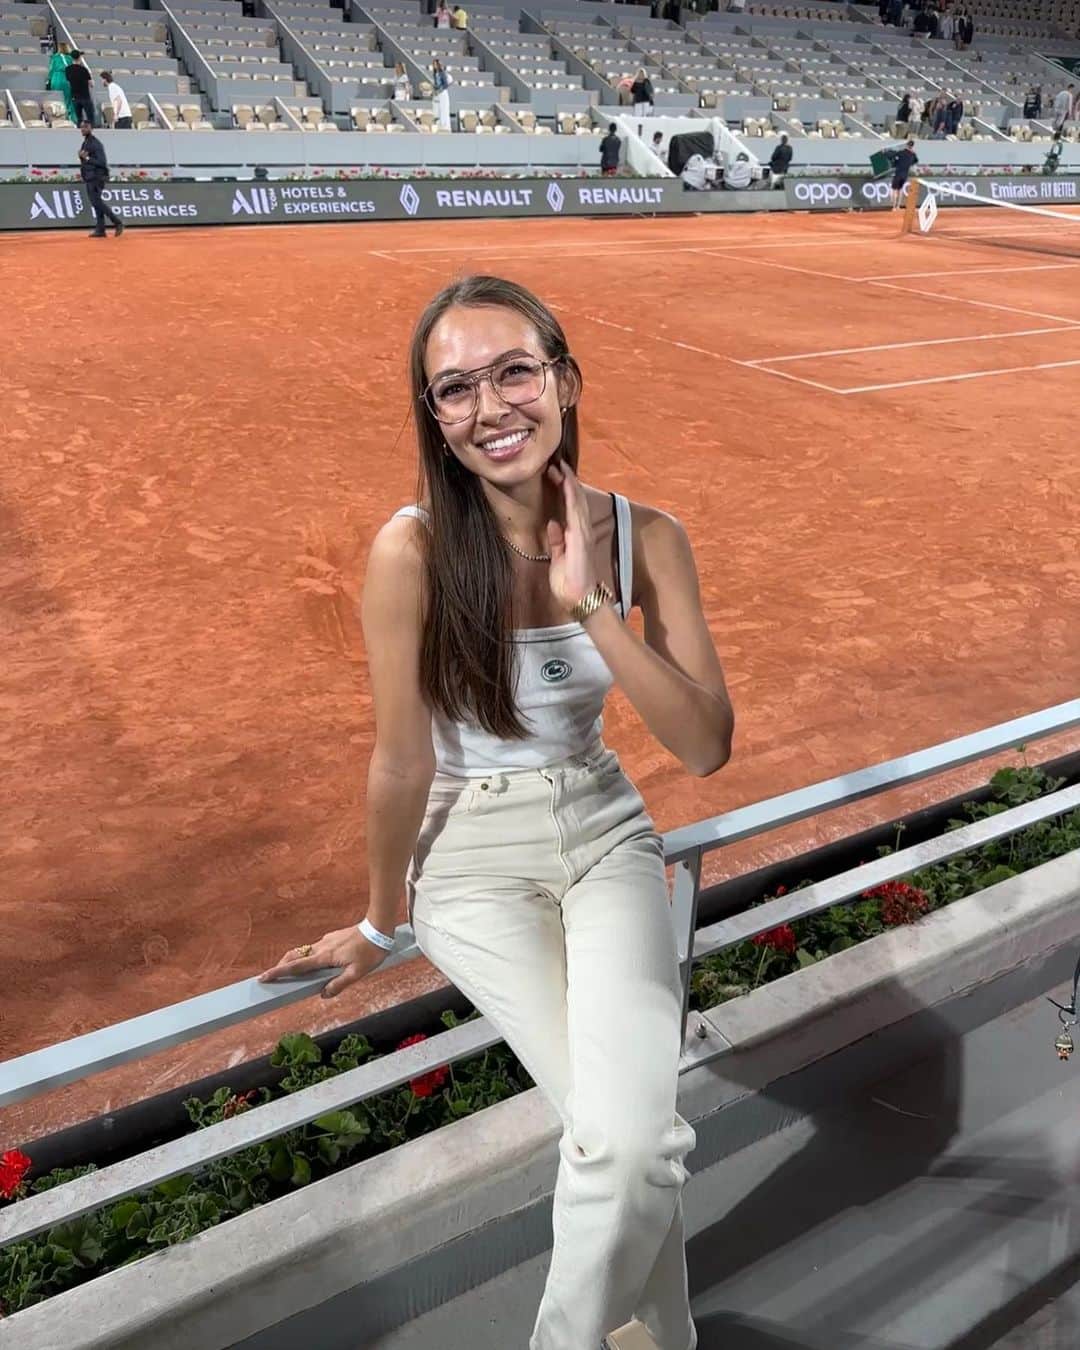 emilyのインスタグラム：「Celebrating our @sportyandrich x @lacoste collaboration at Roland Garros.   Thank you to everyone who came out to celebrate this special night! What an absolute dream to host our dearest friends and colleagues at one of the most iconic tournaments in the world. The cycle of fashion and events moves so quickly, but I try to always take a second and appreciate these moments and be proud of what we’ve built and grown into. Thank you to Lacoste for the incredible access and for believing in our tiny little brand. It’s only the beginning 🫶🏻」